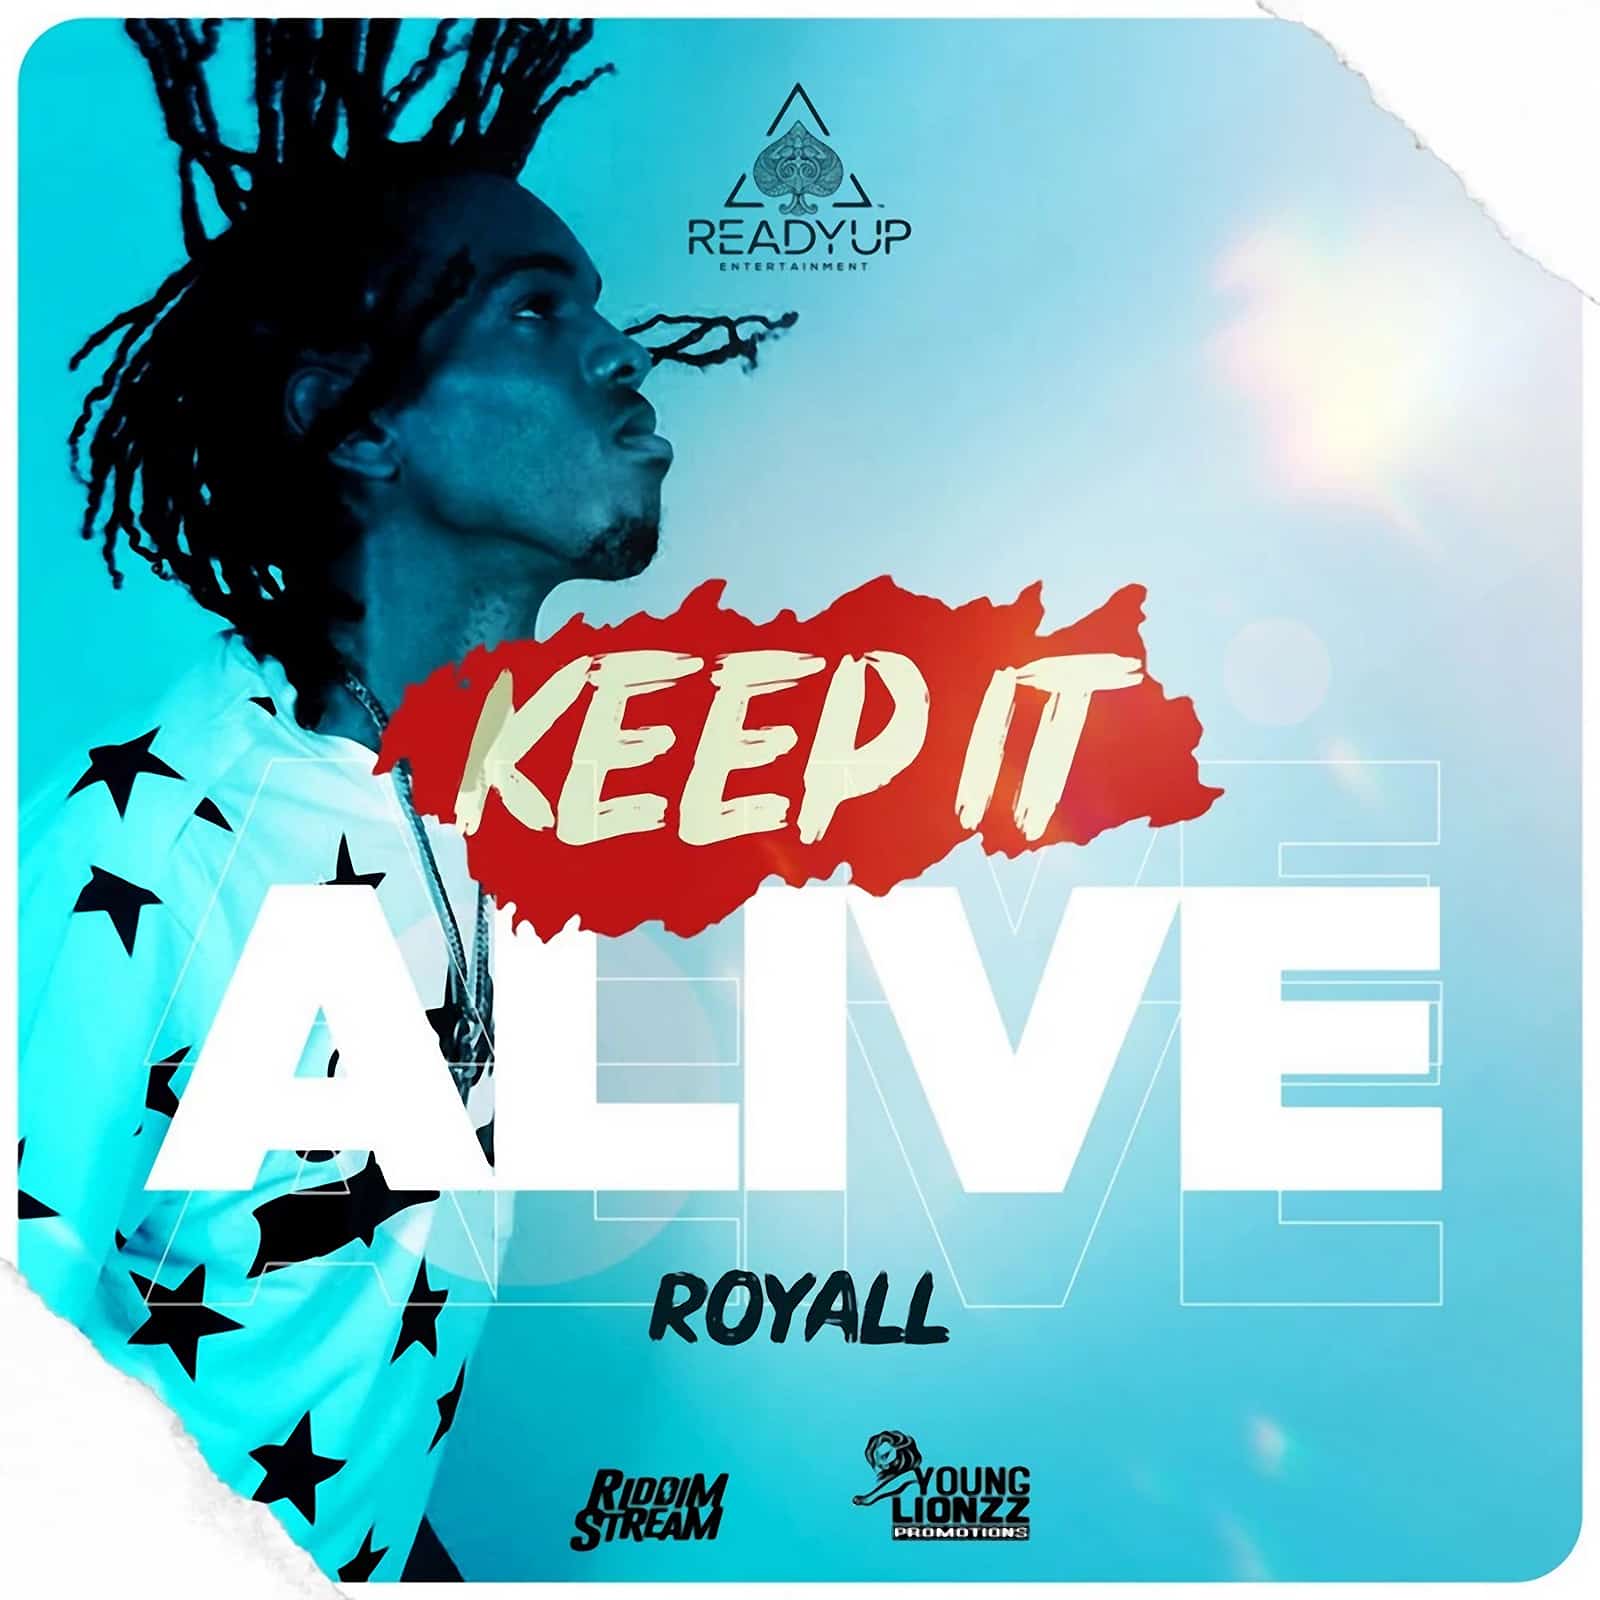 Royall - Keep It Alive - Ready Up Entertainment / Riddimstream